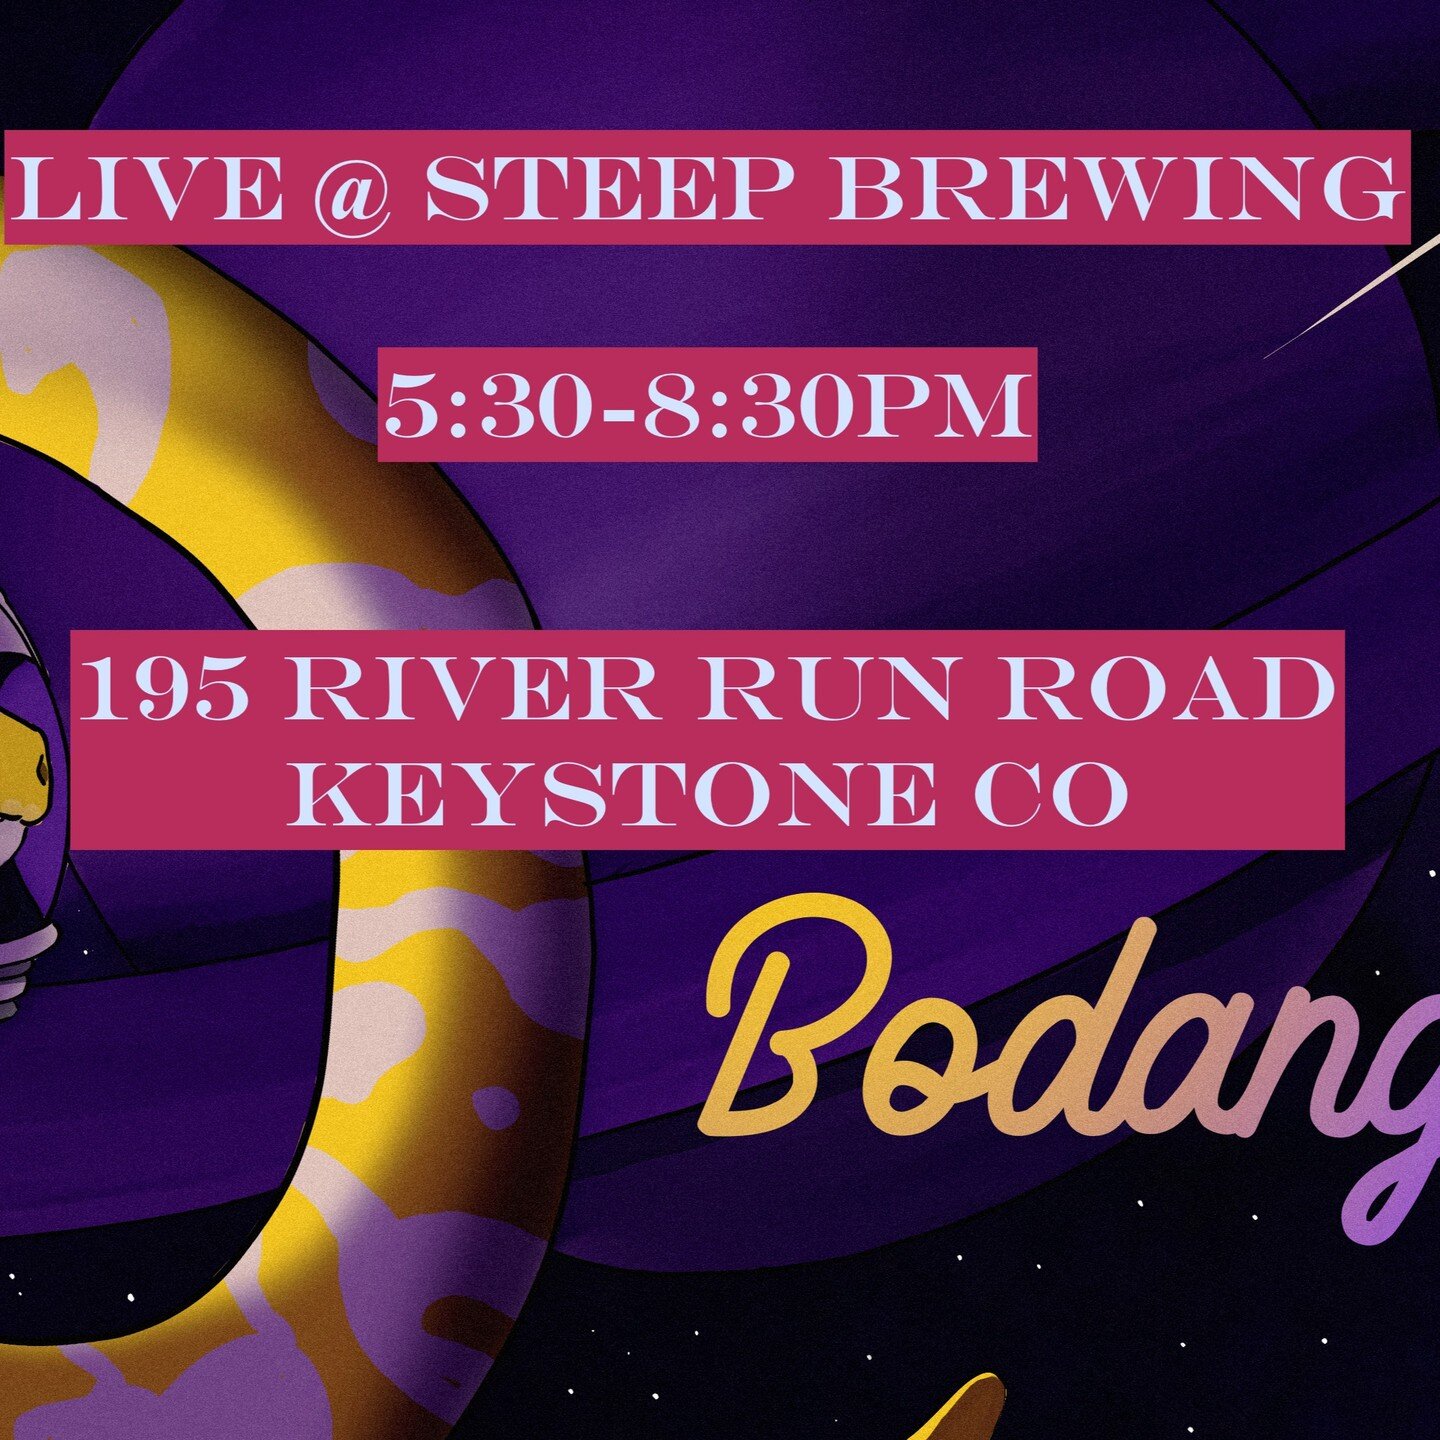 We're playing at Steep Brewing in Keystone this Saturday 11.25!! Playing from 5:30-8:30pm at the river run location!!